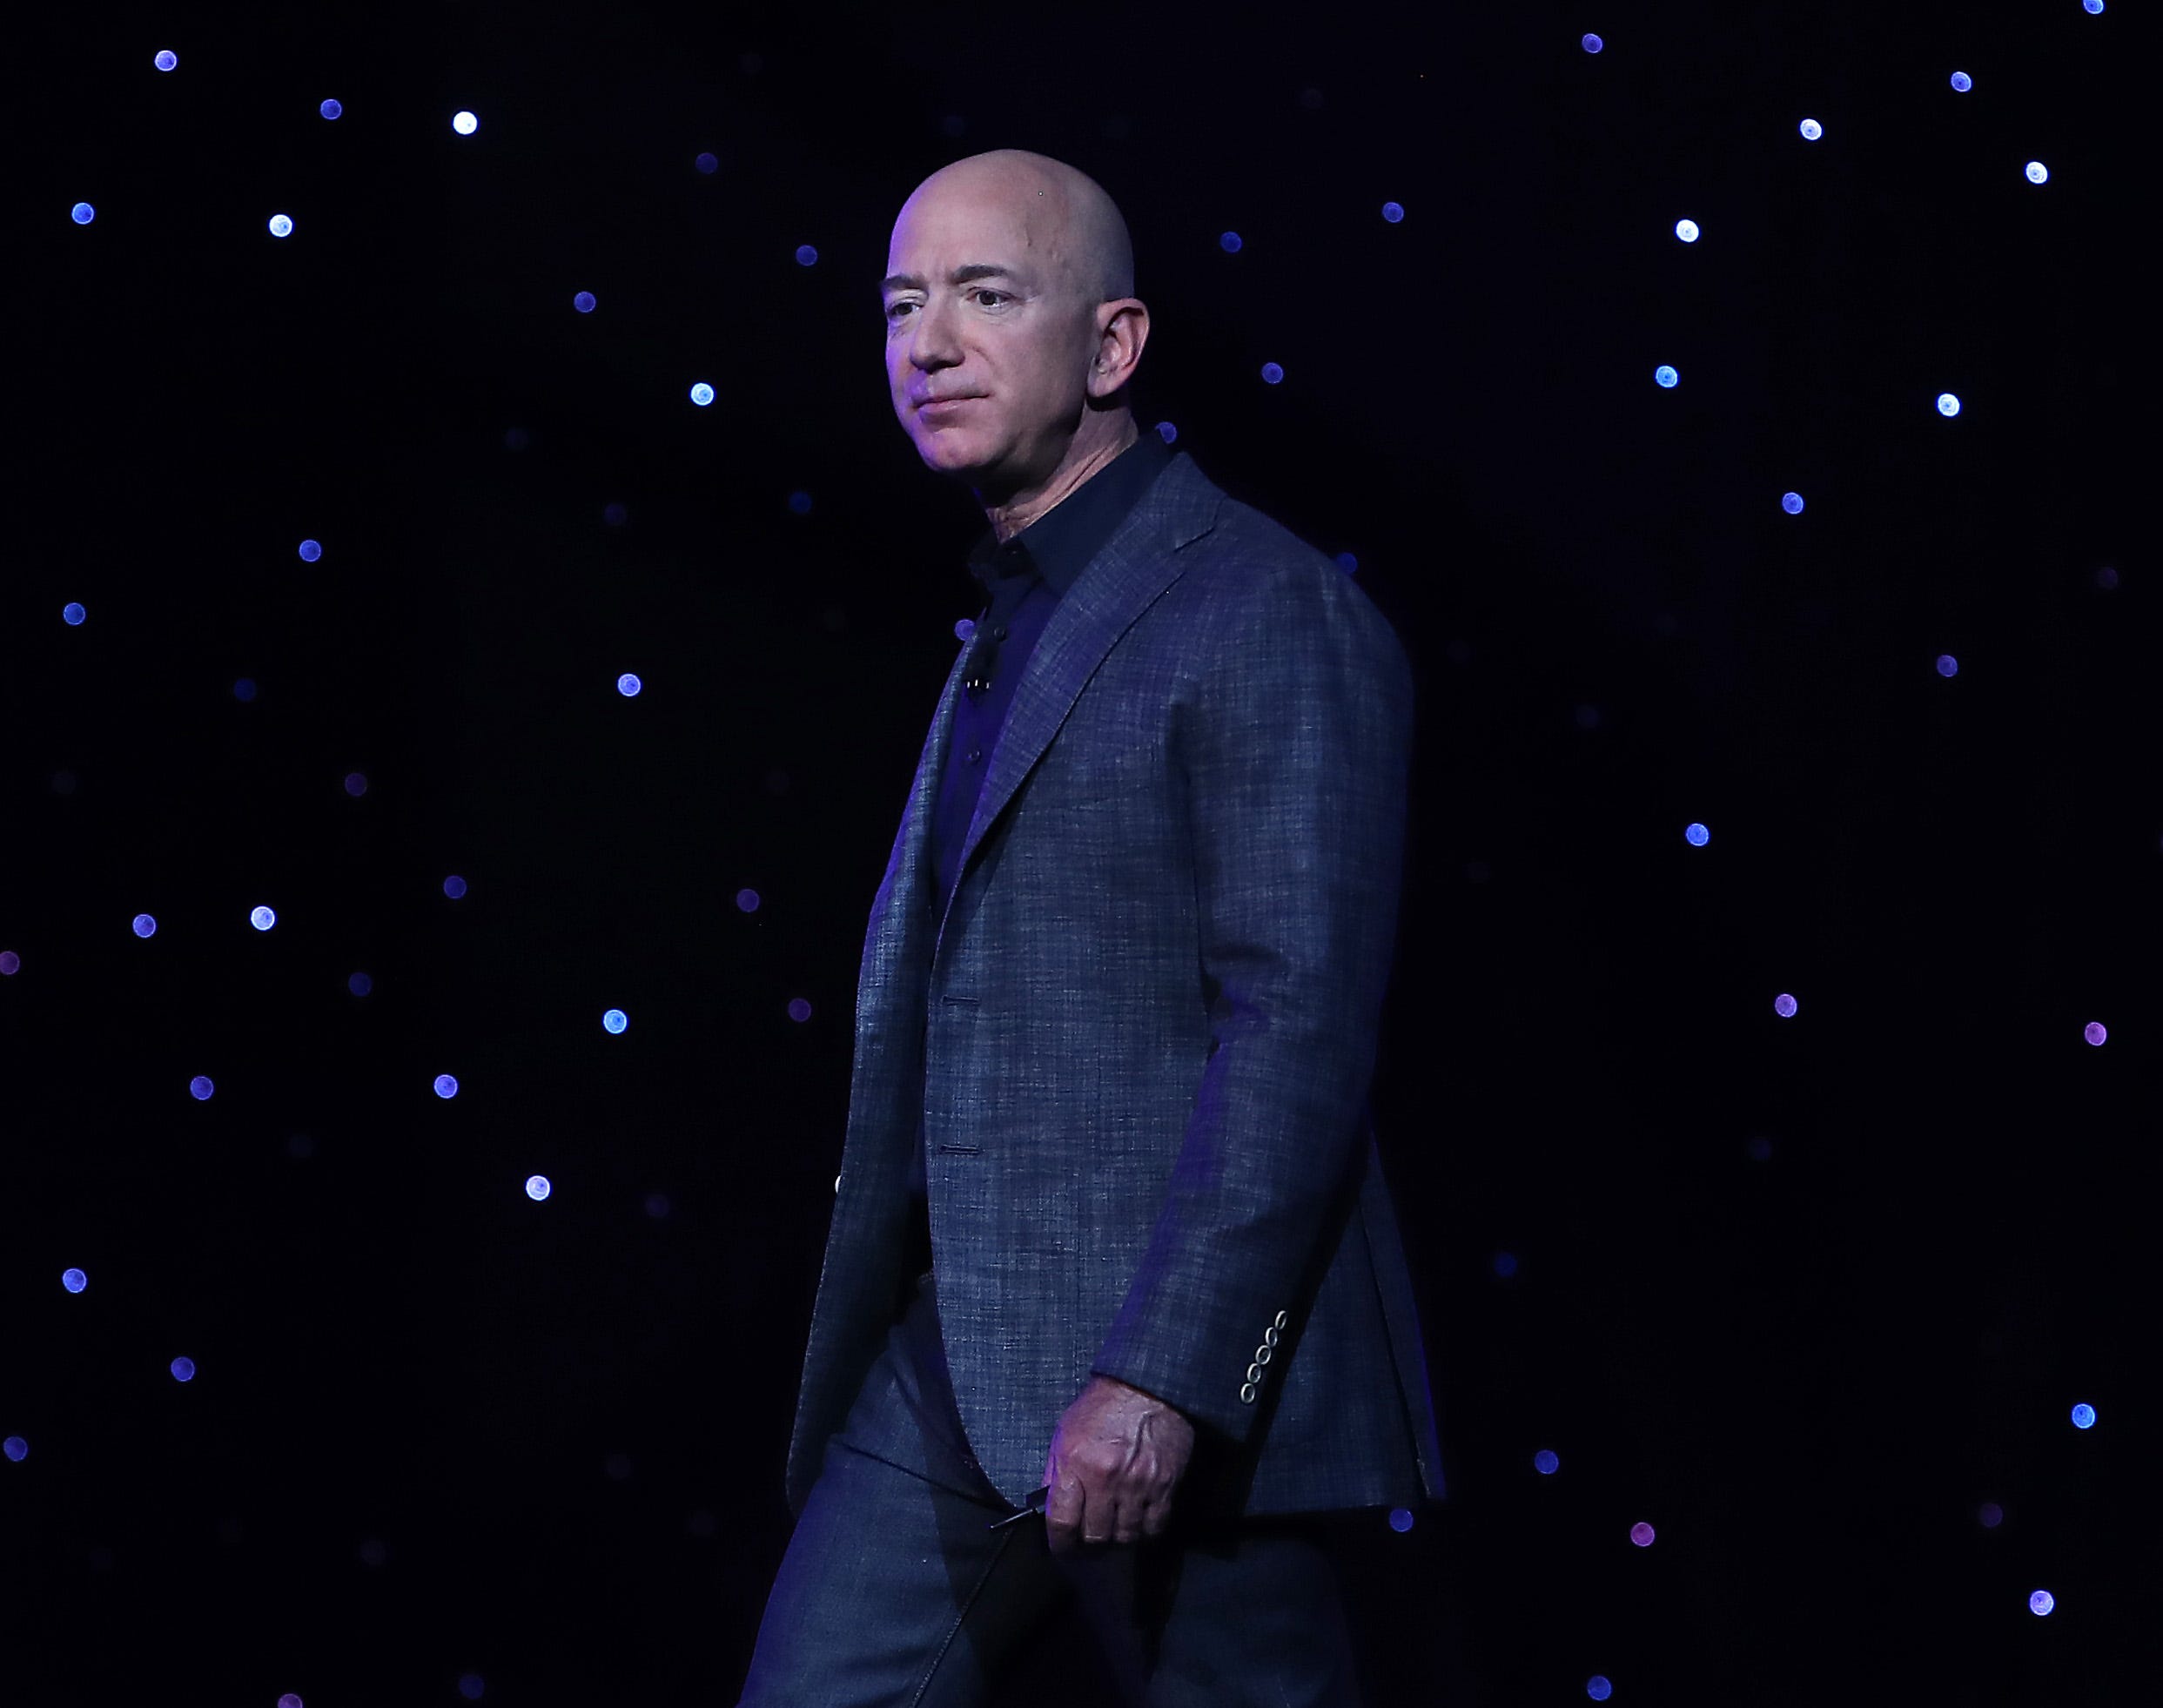 Jeff Bezos is seen in front of a background covered with stars.